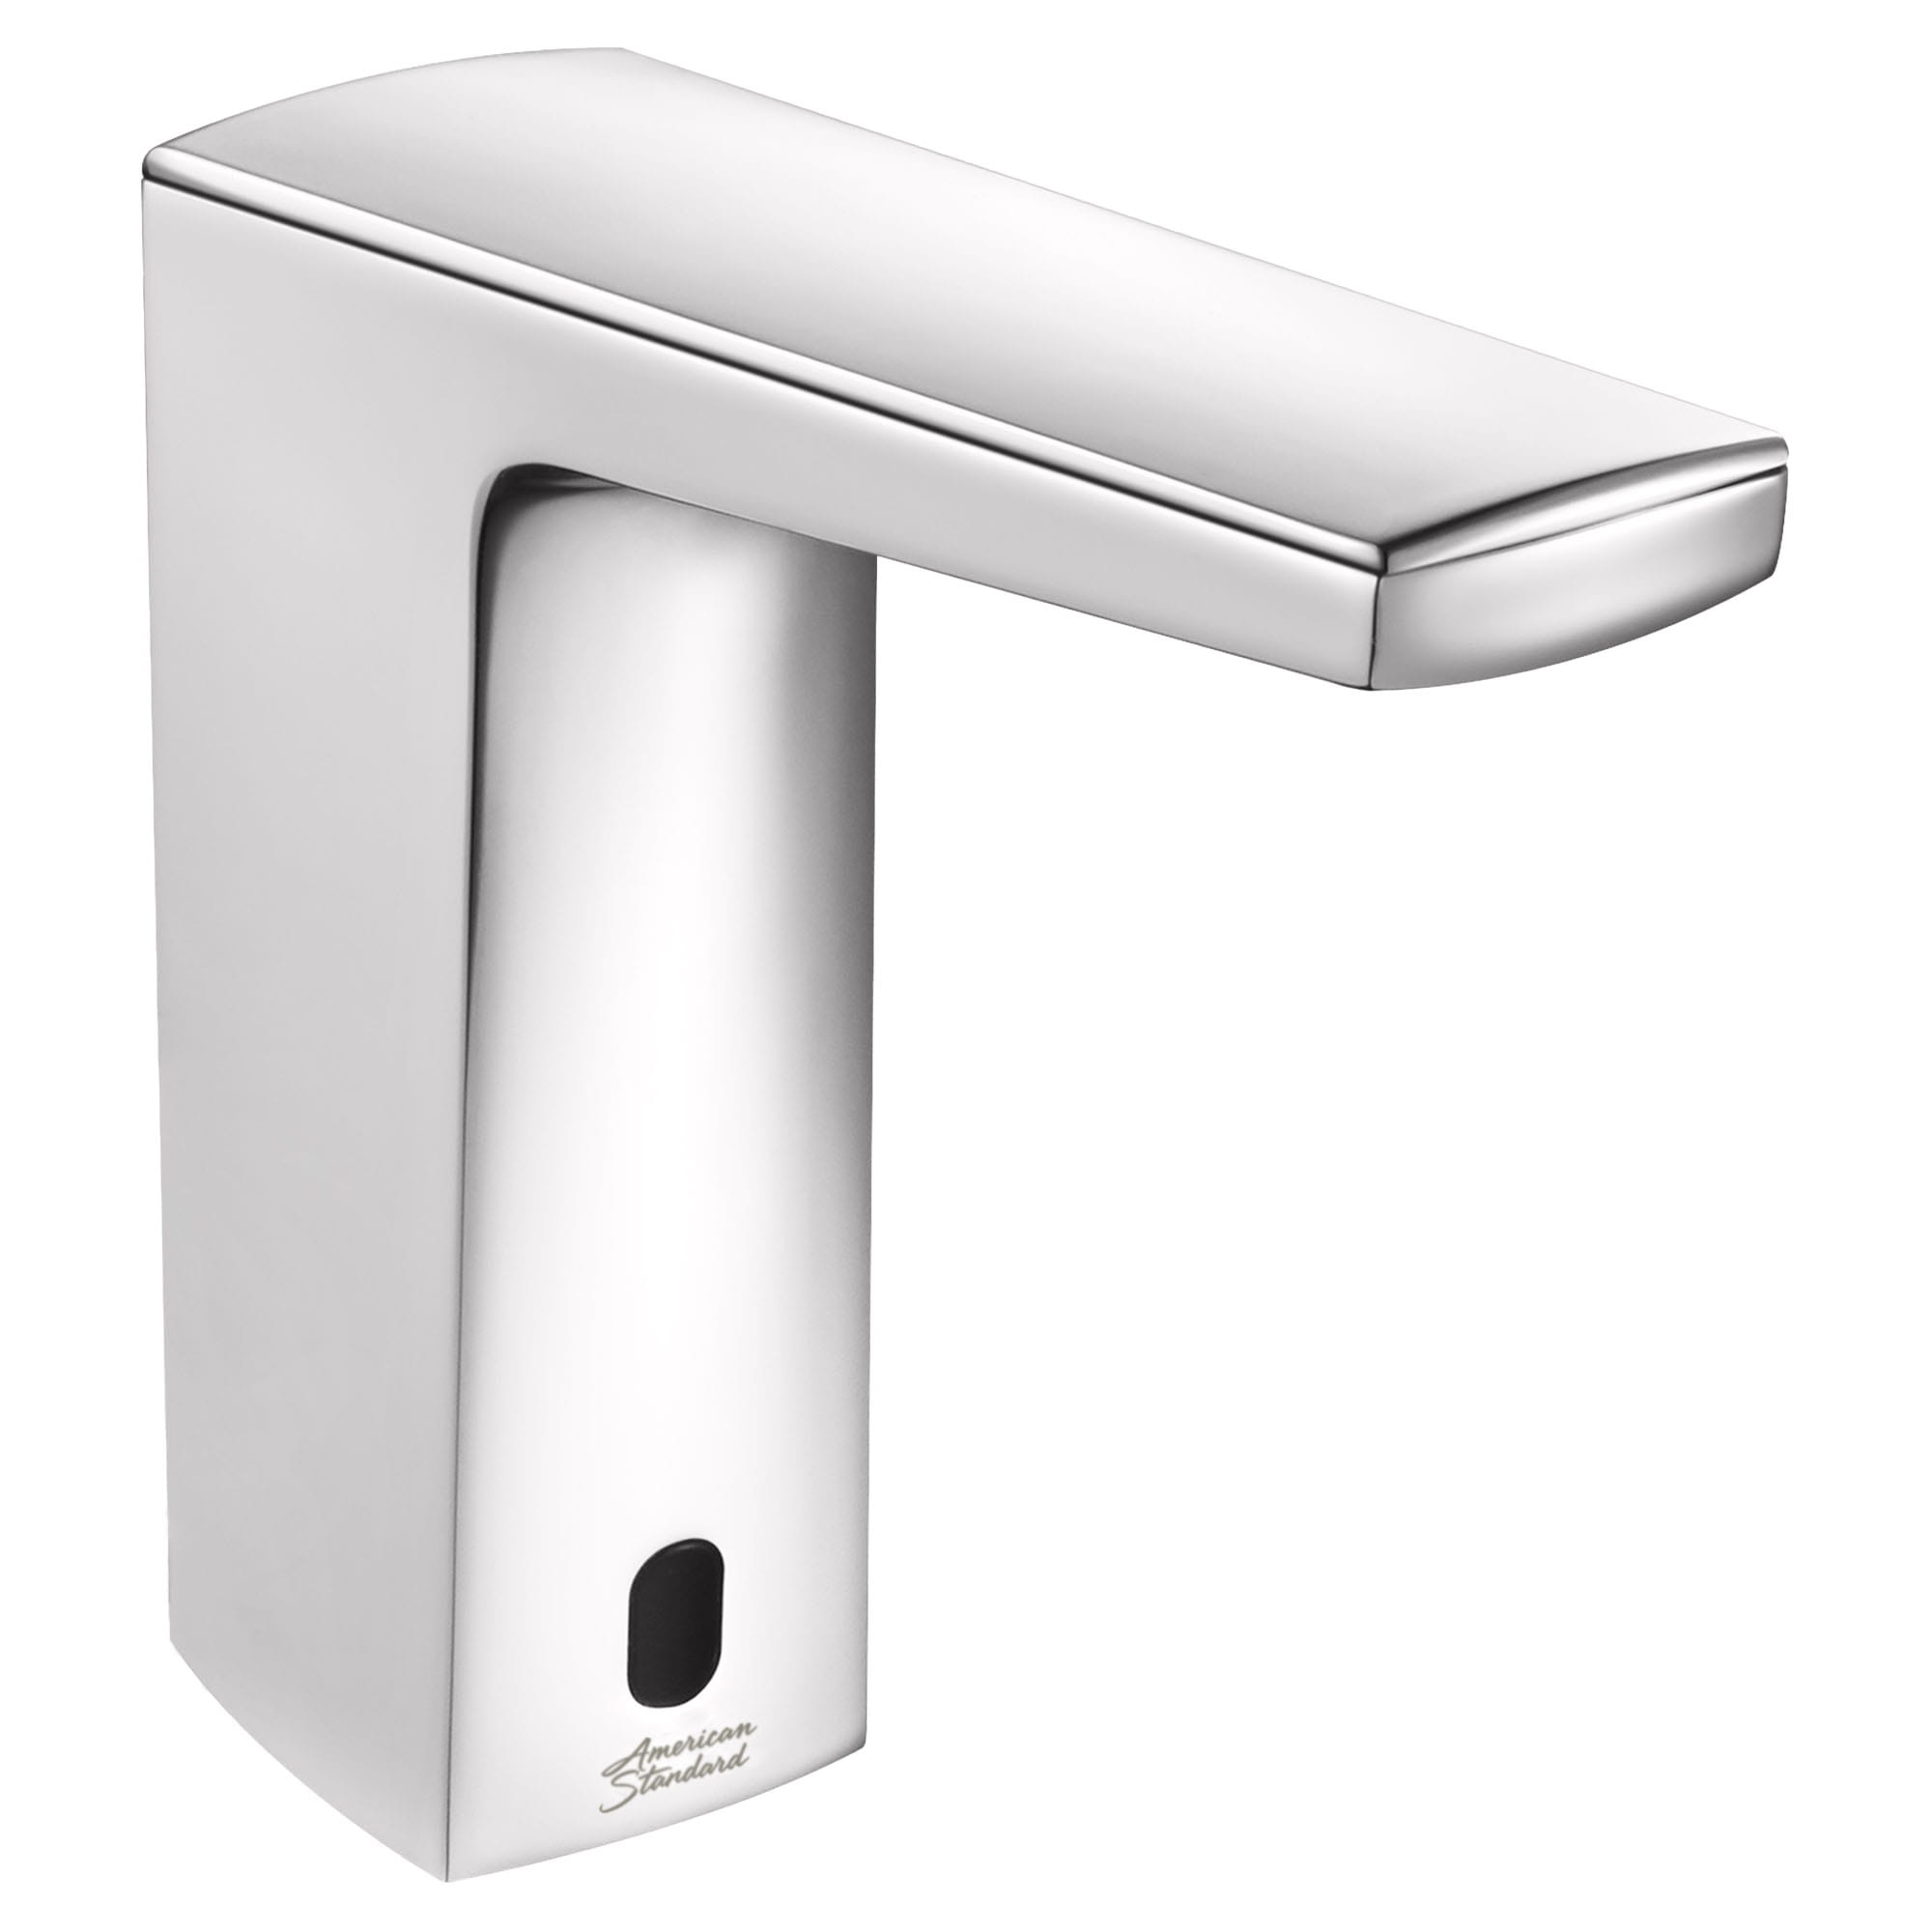 Paradigm Selectronic Touchless Faucet Battery Powered With Above Deck Mixing 05 gpm 19 Lpm CHROME